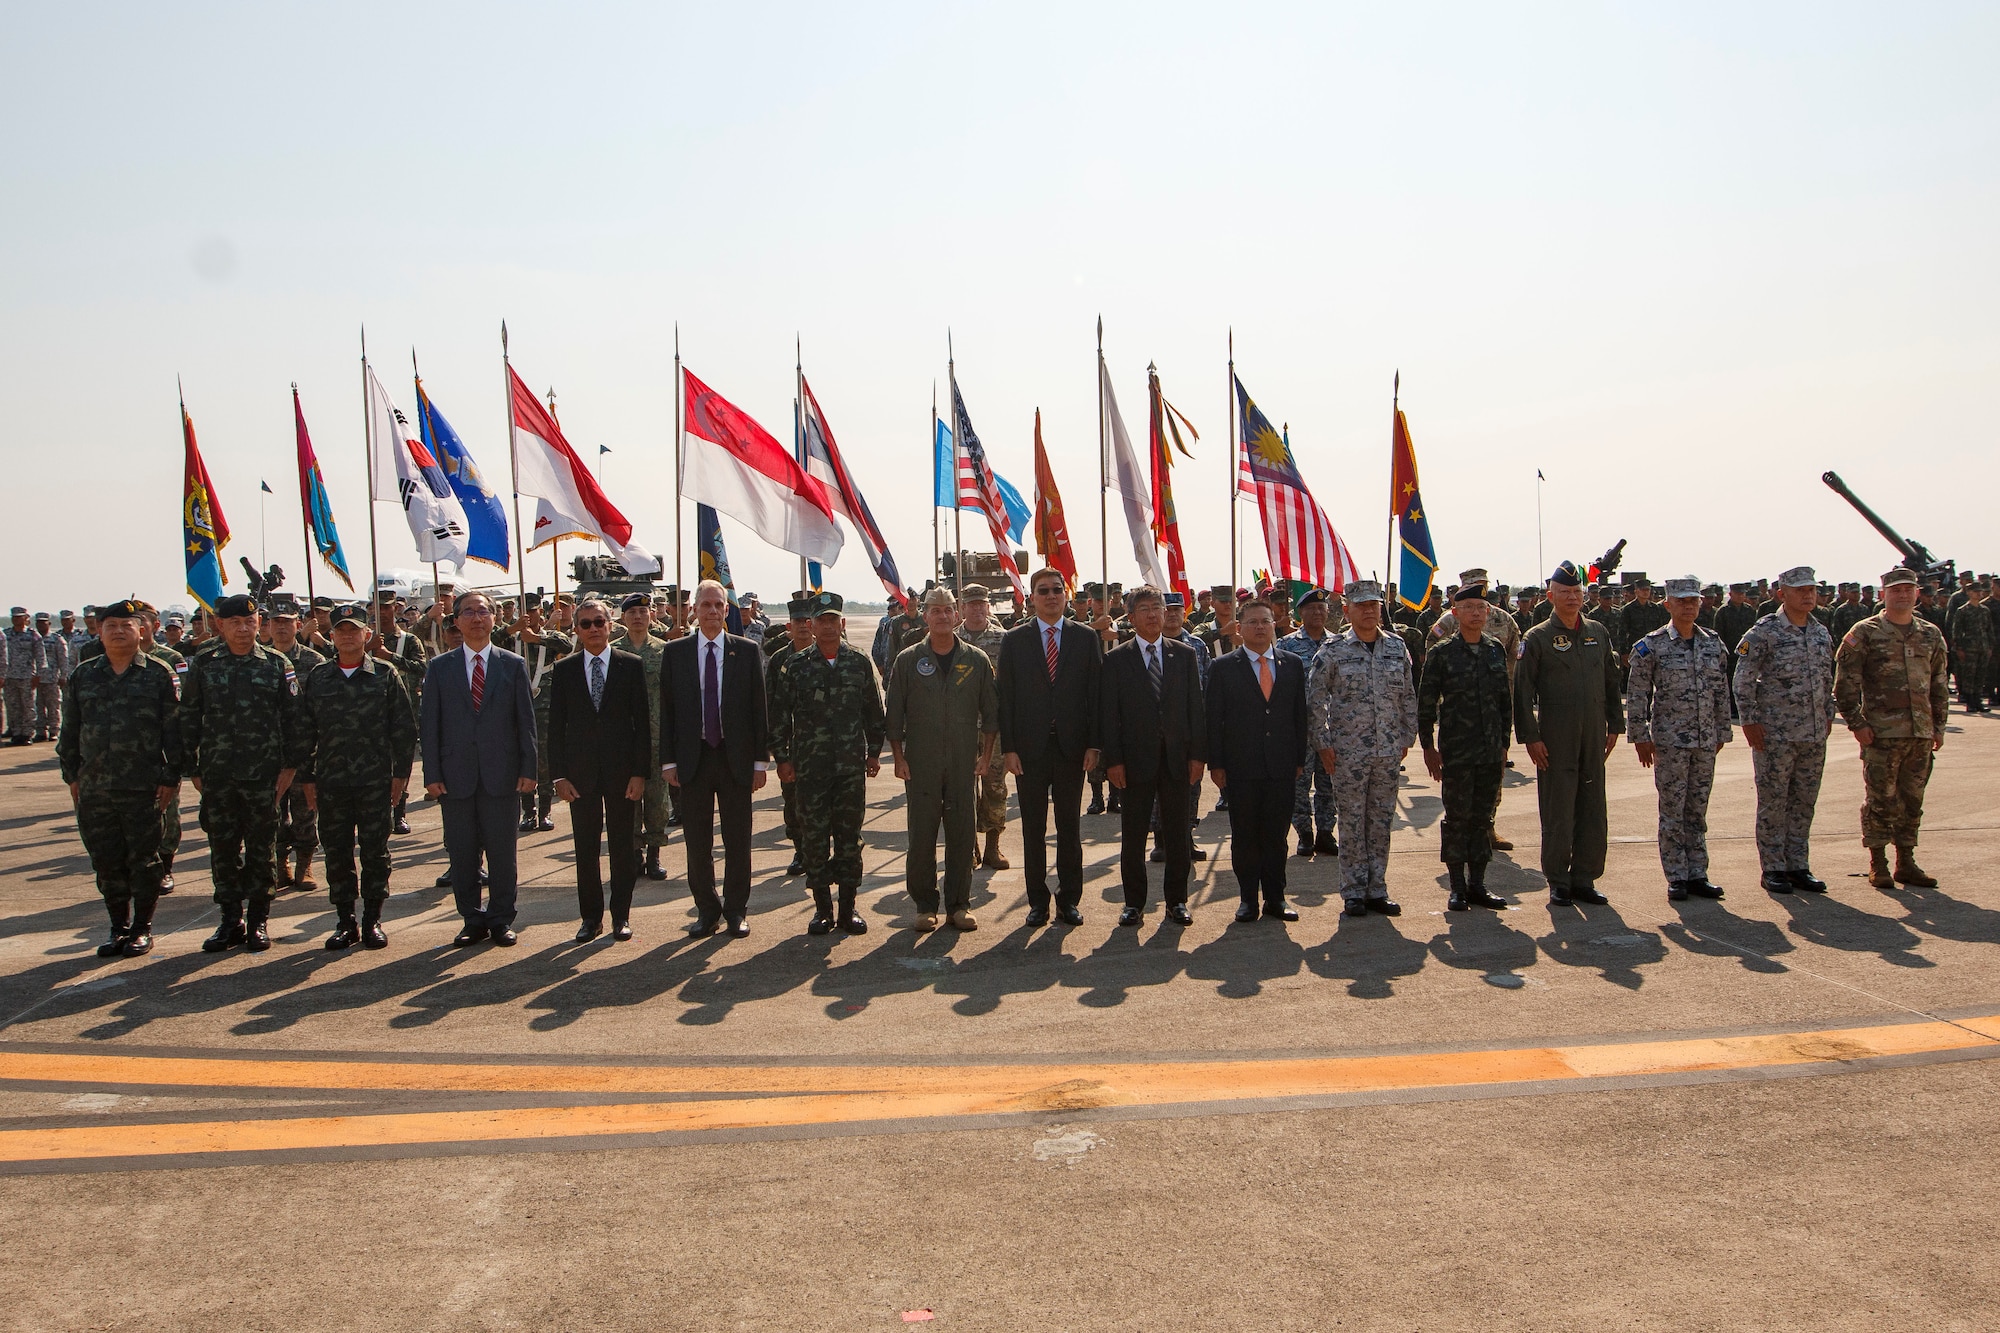 Service members, key leaders, and representatives from participating nations attend the opening ceremony of Exercise Cobra Gold at Utapao International Airport, Ban Chang district, Rayong province, Kingdom of Thailand, Feb. 28, 2023. Cobra Gold, now in its 42nd year, is a Thai-U.S. co-sponsored training event that builds on the longstanding friendship between the two allied nations and brings together a robust multinational force to promote regional peace and security in support of a free and open Indo-Pacific. (U.S. Army National Guard photo by Staff Sgt. Adeline Witherspoon)